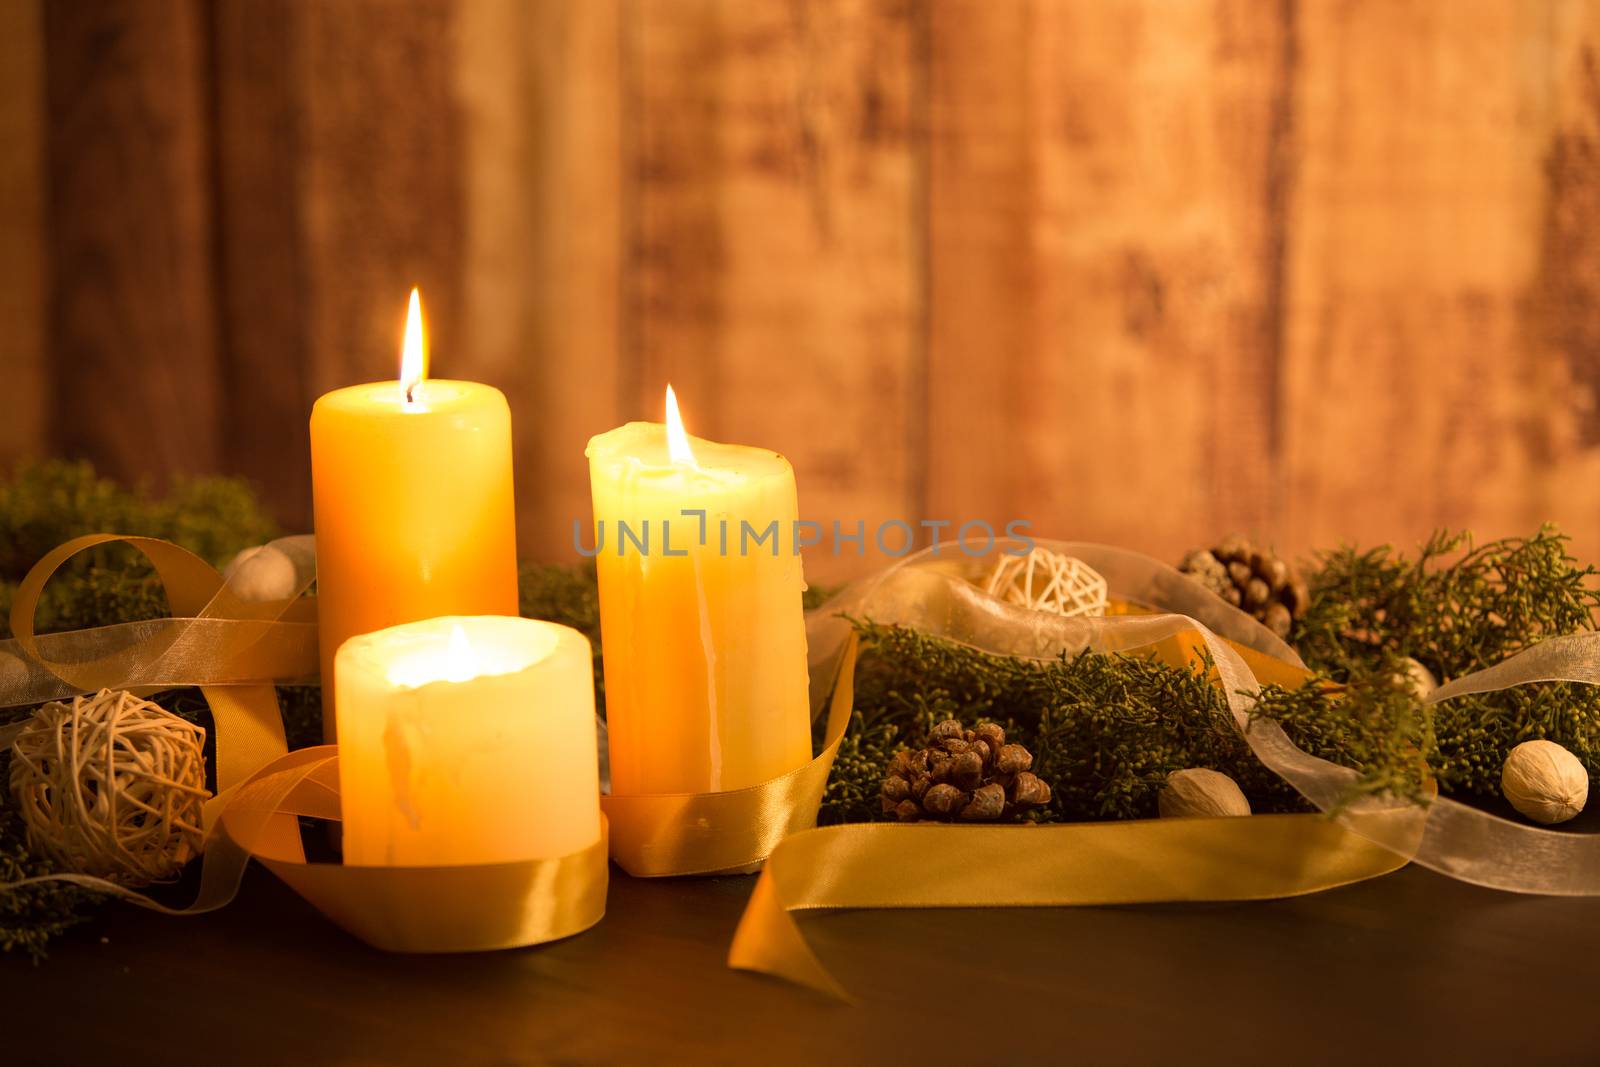 The warmth of the Christmas concept: three candles lit on a dark wooden table and a rustic wooden setting with pine branches, natural pine cones and gold satin and white organza ribbons